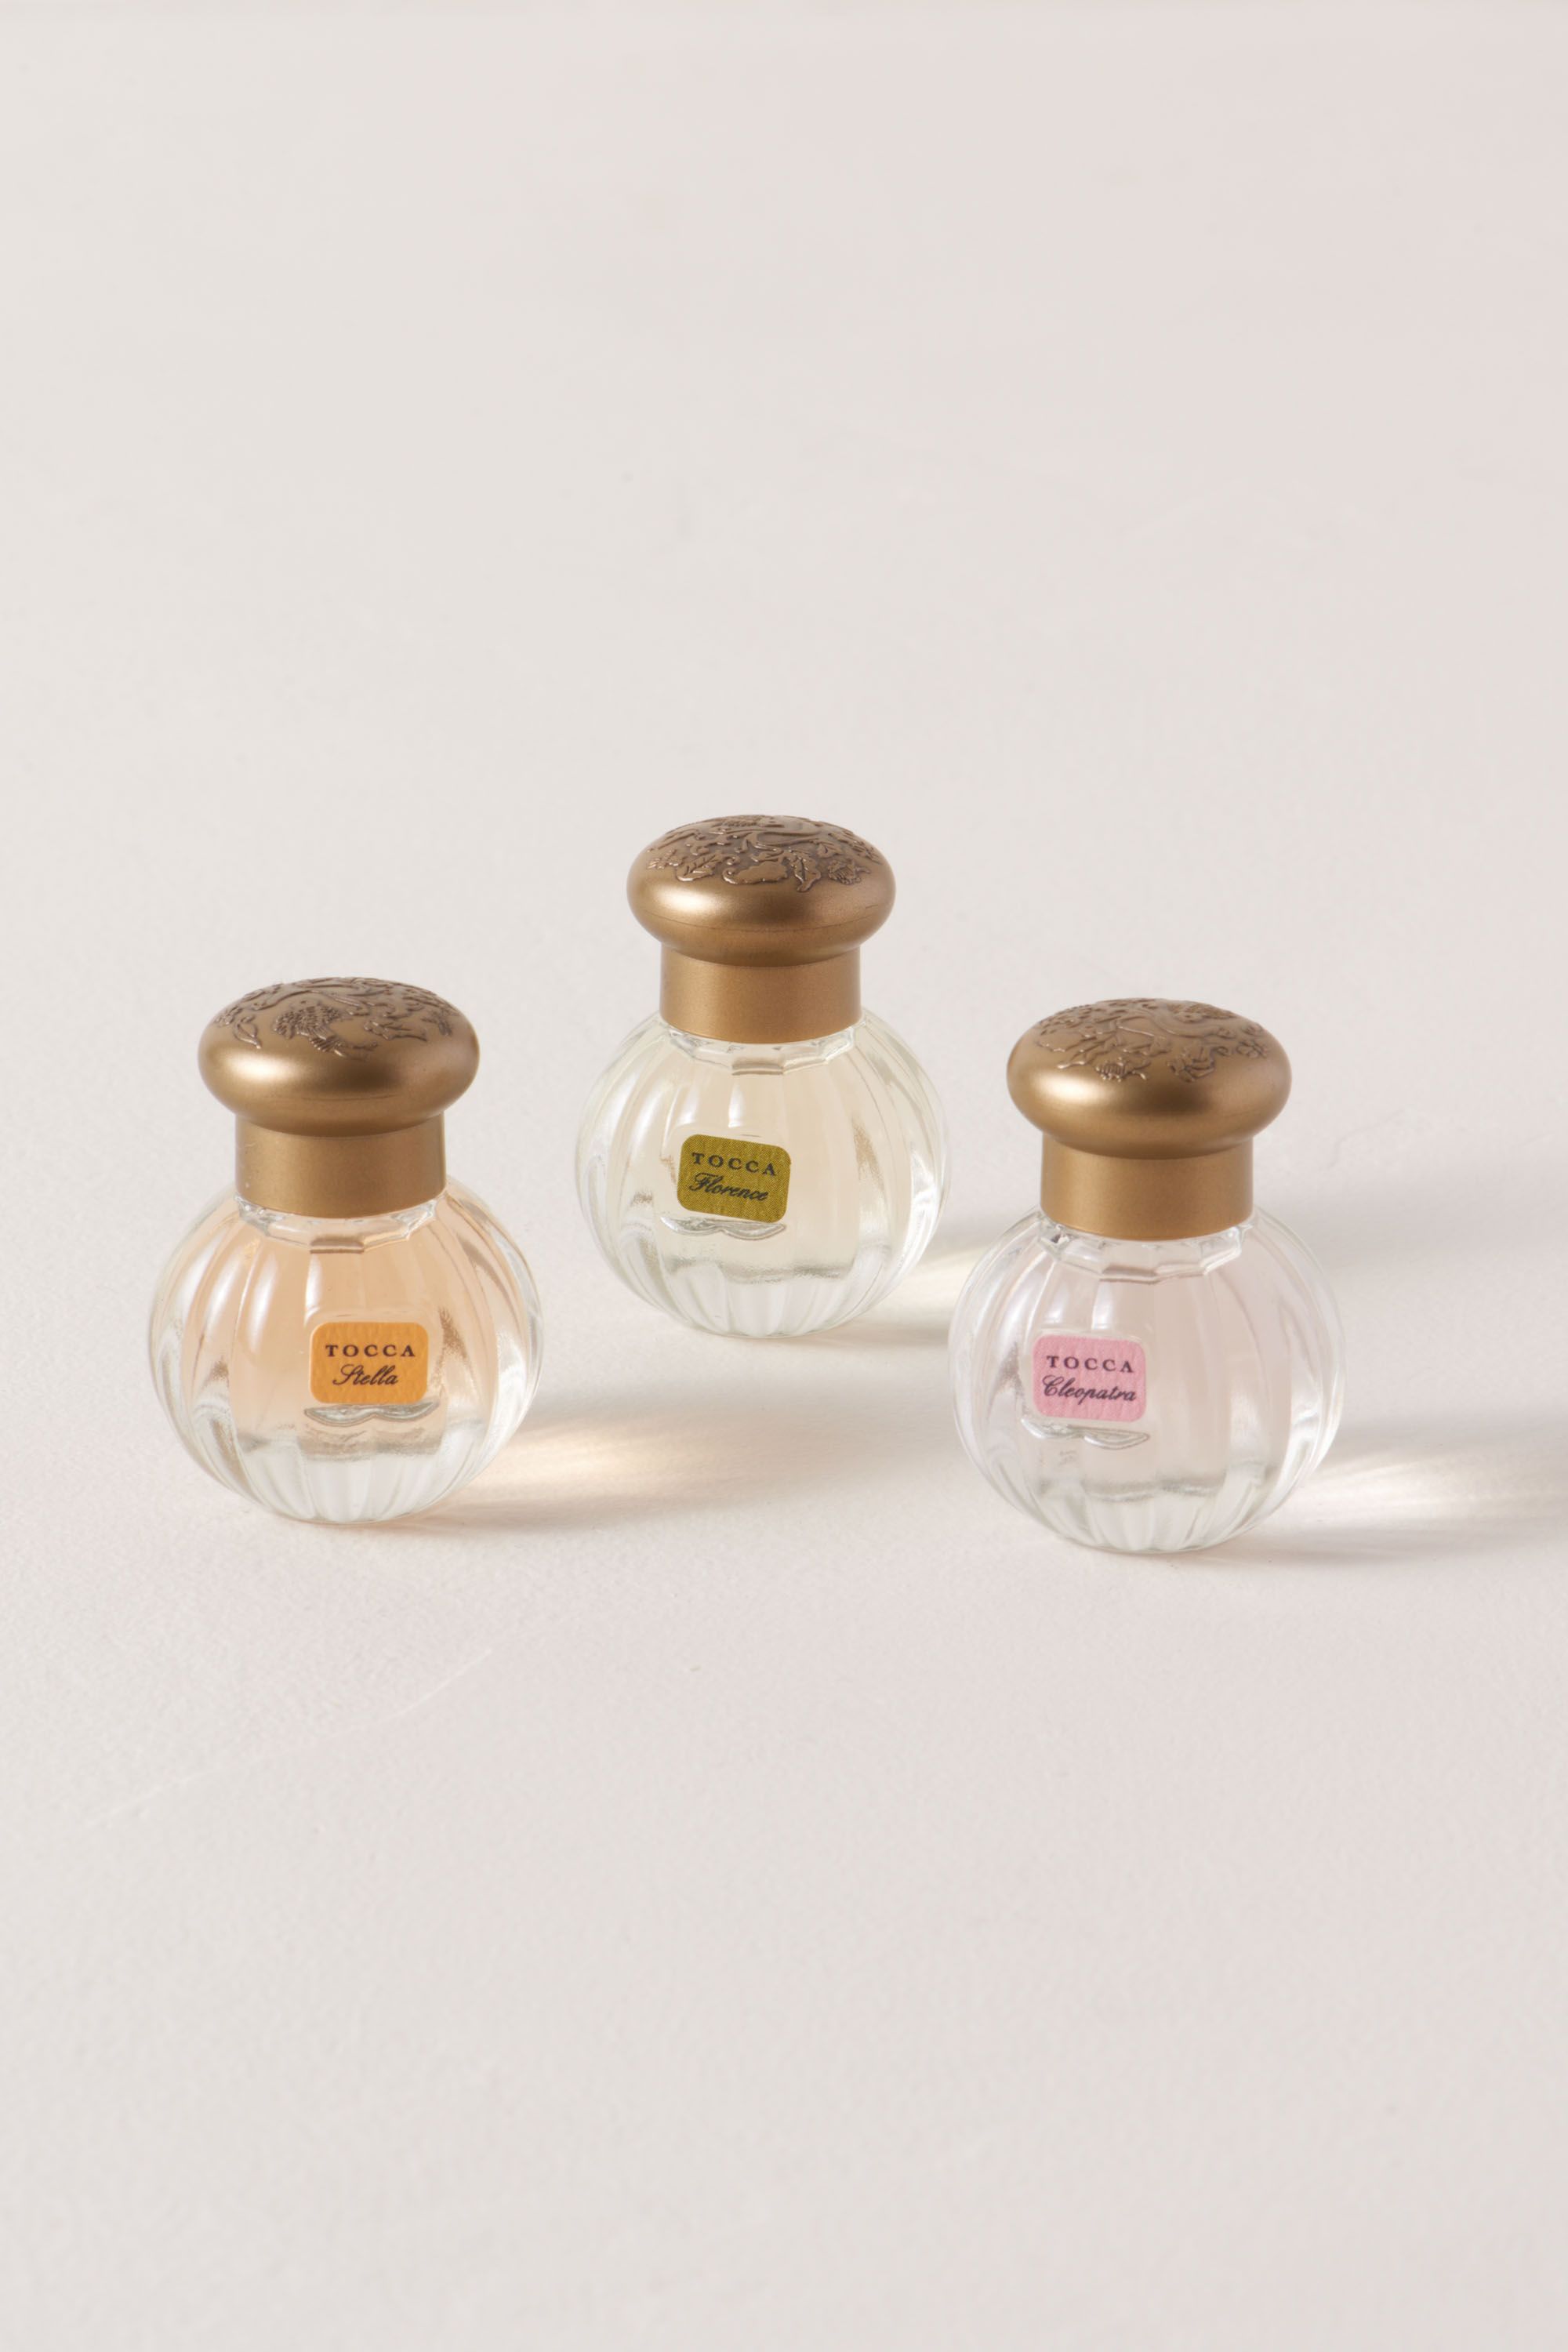 Assorted Tocca Mini Perfume Set | BHLDN. Pink & Gold Bridal Shower Decor, DIY + Gift Ideas...certainly lovely indeed. Decorating ideas for bridal showers and gift guide as well as DIY ideas for romantic paper flowers!